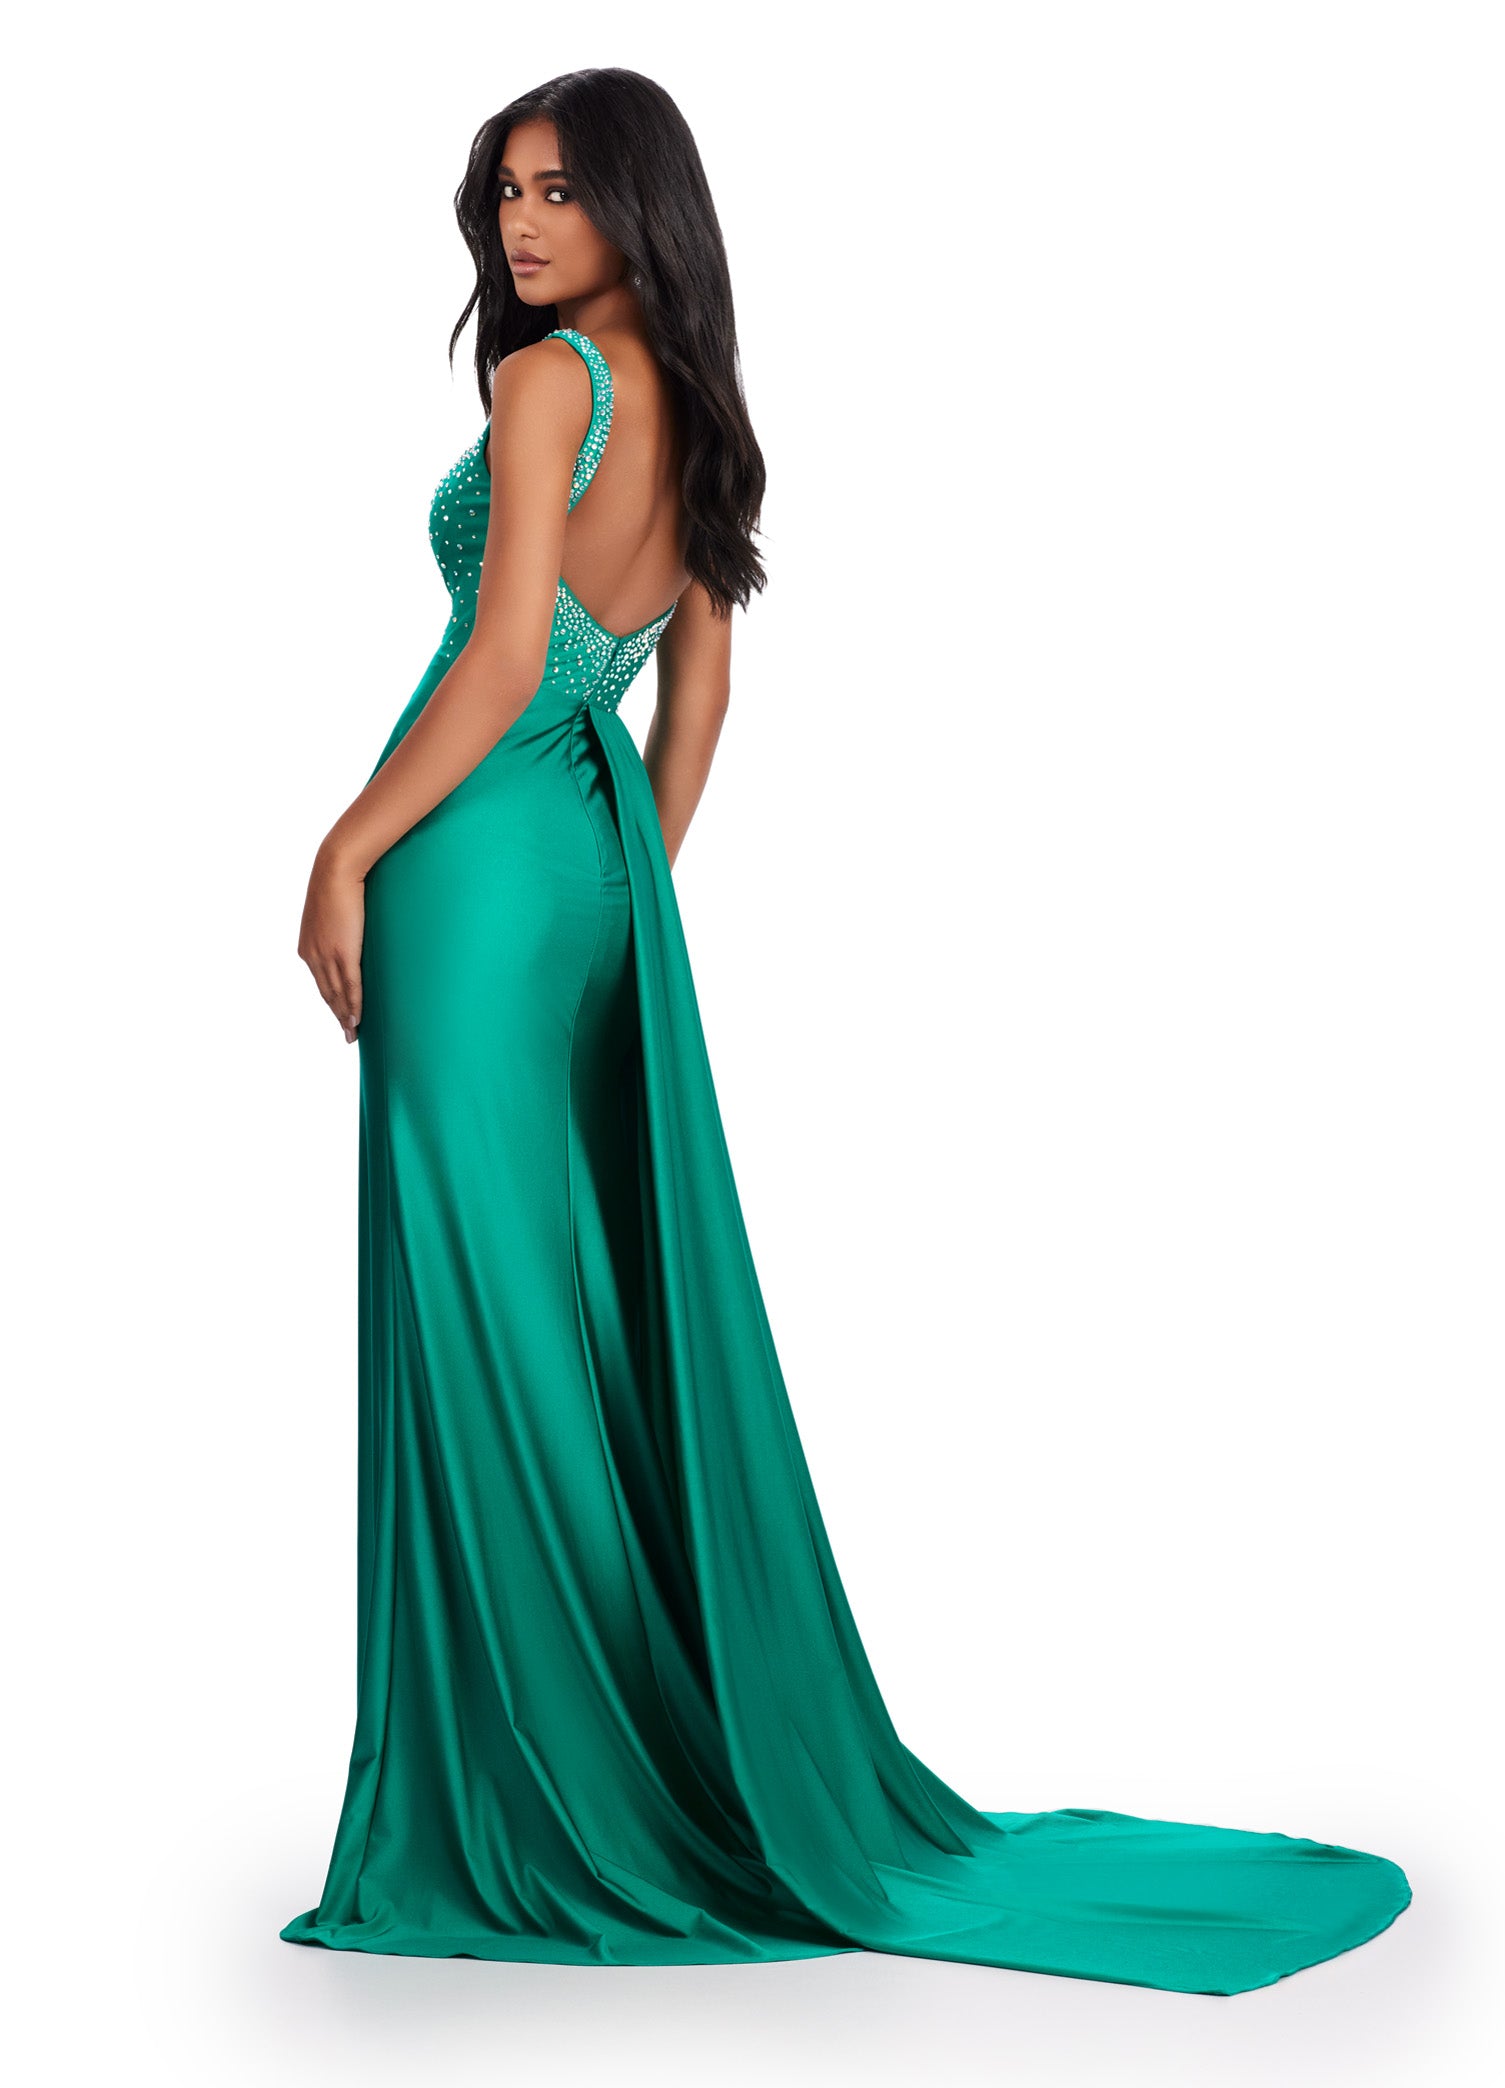 Elevate your formal look with the Ashley Lauren 11579 Long Prom Dress. Made with jersey fabric, this gown features press-on stones and a side skirt slit for added glamour. Perfect for pageants or prom, this dress will make you stand out on any occasion.This unique jersey gown features press on stones and a fabulous side skirt. Perfect for your next event!